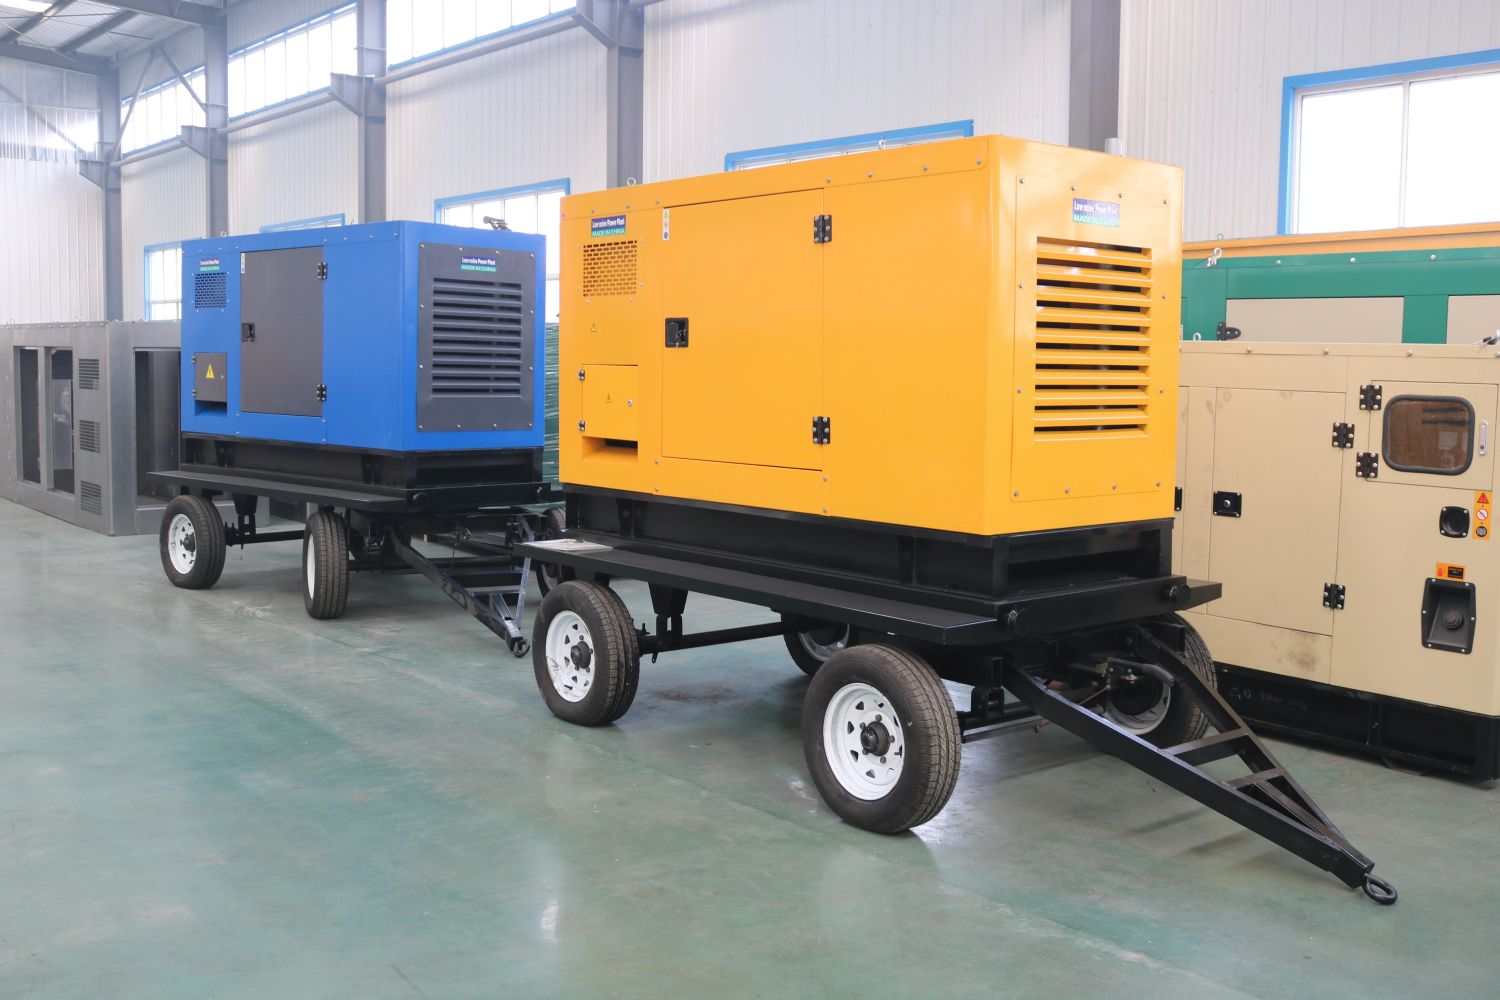 South African Diesel Genset Industry Outlook Report 2022-2025: Opportunities for Distributor in Innovative Customer Services and the Ability to Adapt and Enter New Markets